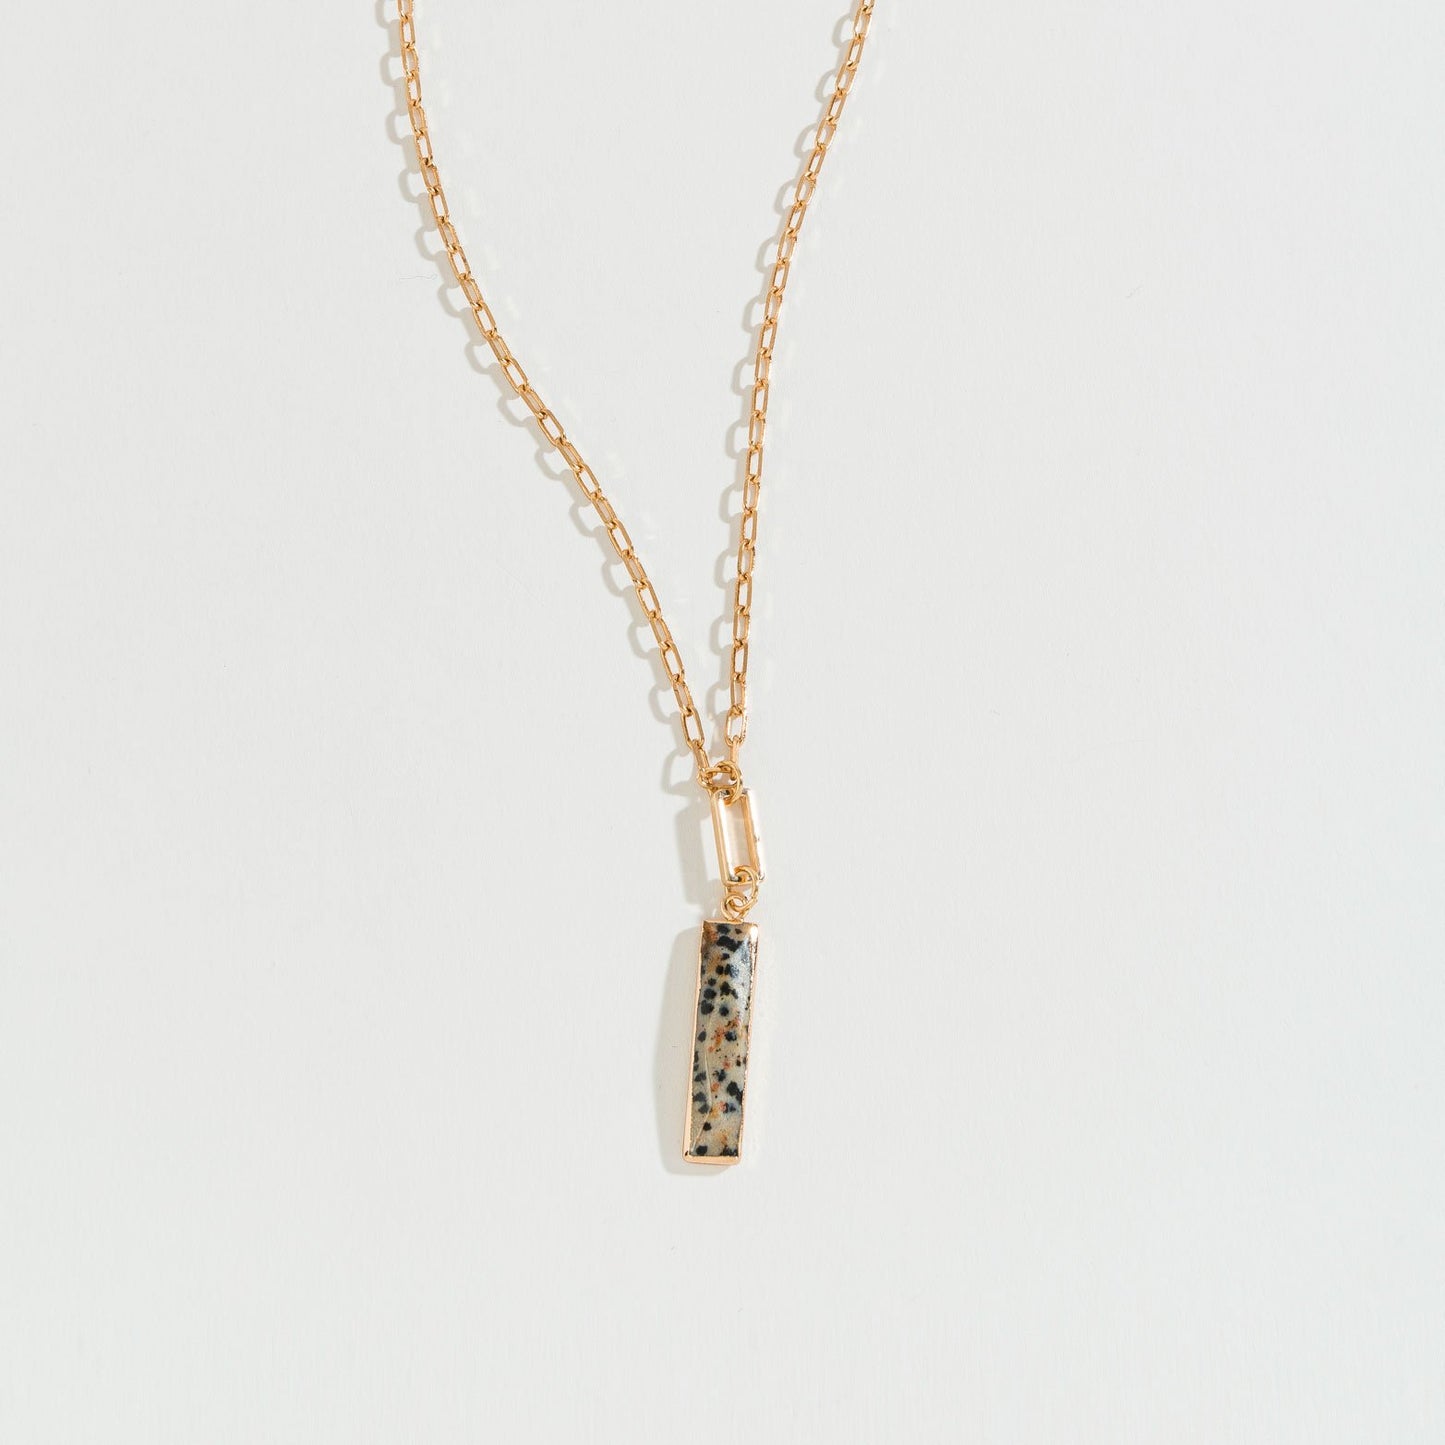 RECTANGLE STONE WITH GOLD CHAIN PENDANT NECKLACE